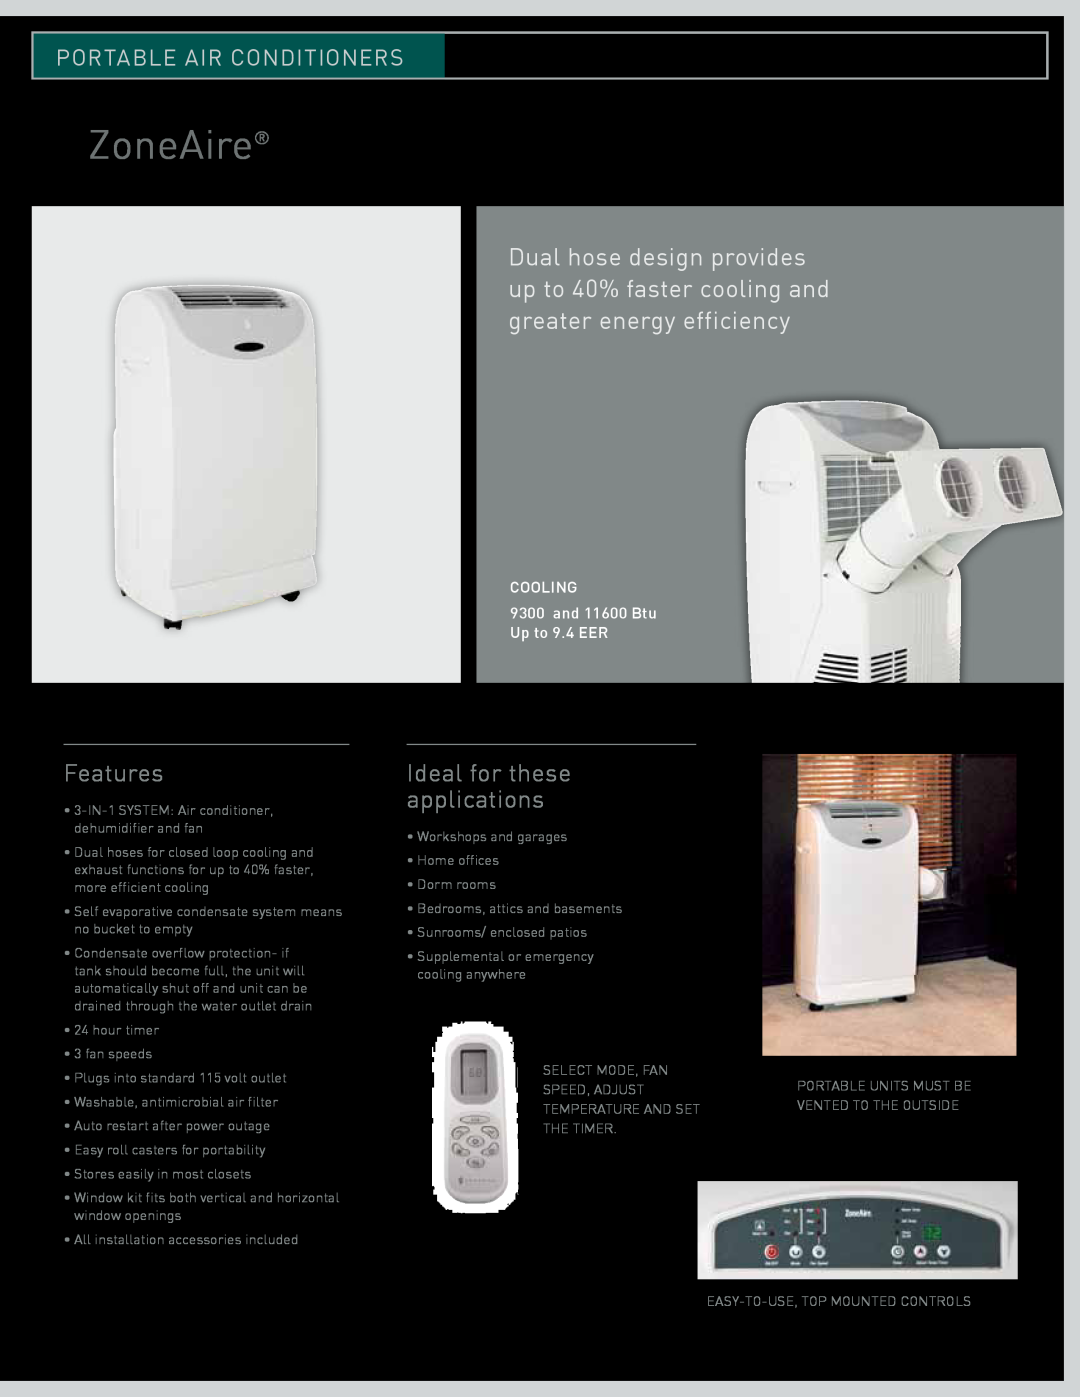 Friedrich CP08, Room Air Conditioners, CP06 ZoneAire, Features, Ideal for these applications, Portable Air Conditioners 